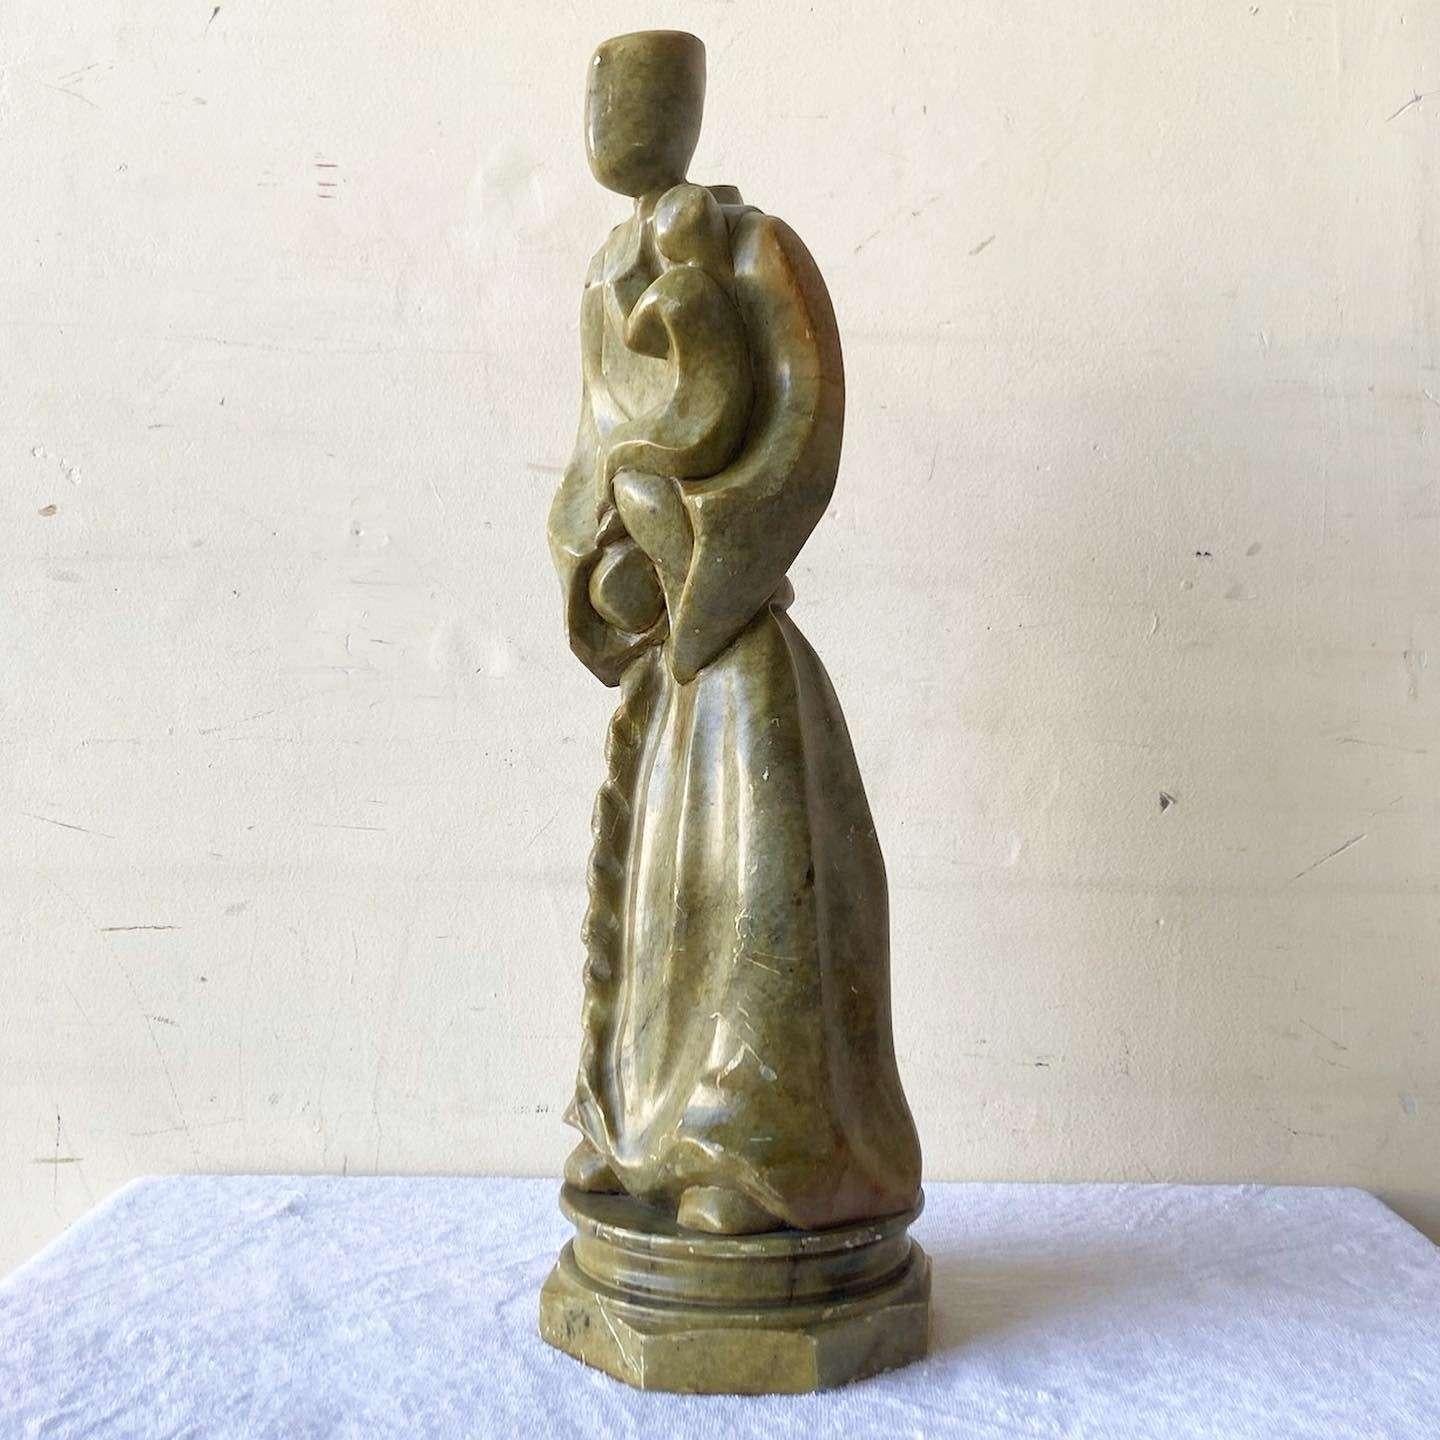 Exceptional vintage handmade marble sculpture of St. Anthony holding a child. Features a fantastic smooth polished finish of a green stone.
